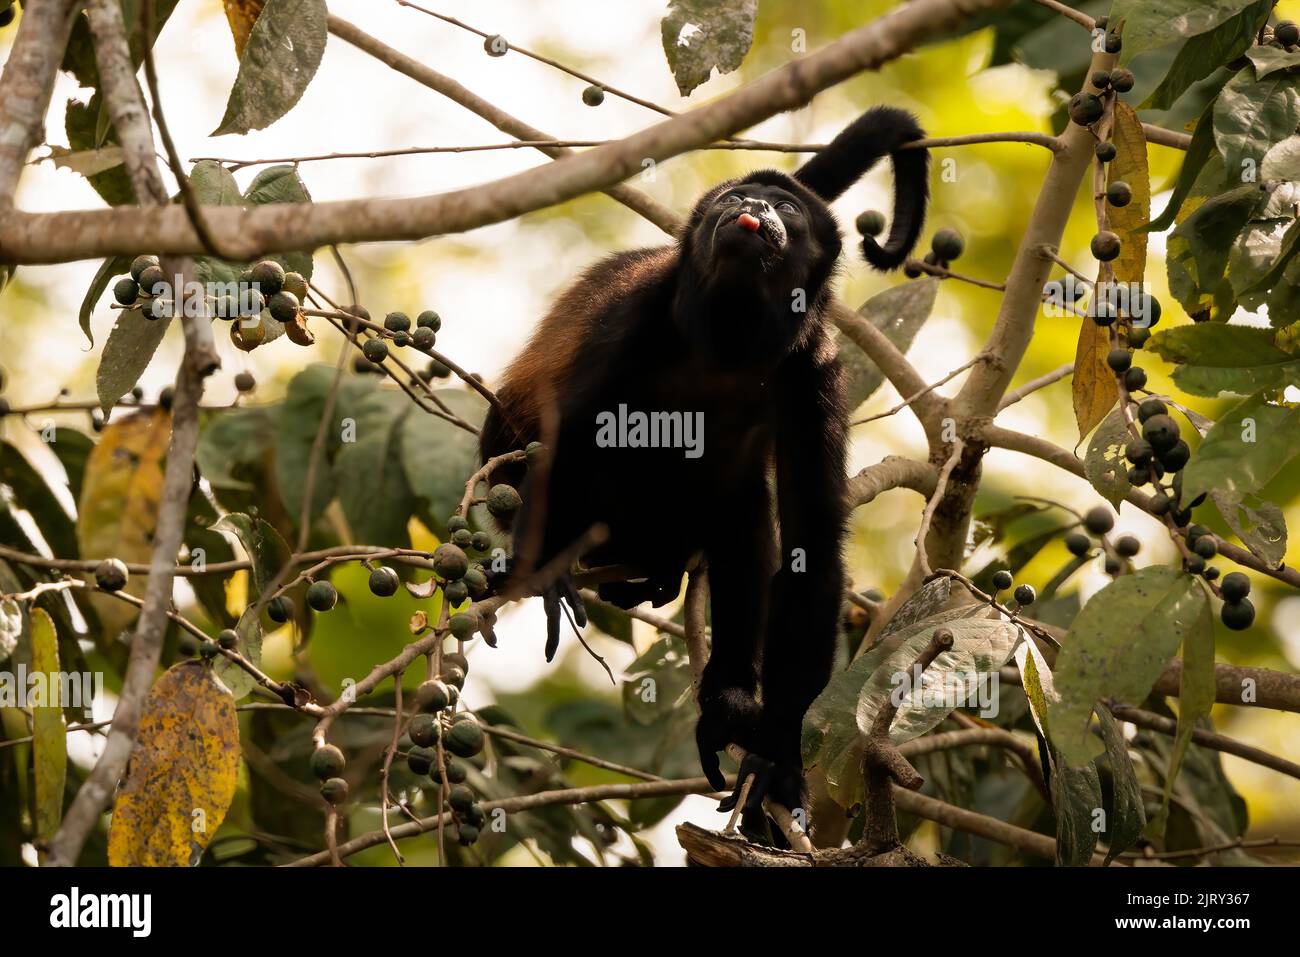 Spider monkey (Simia paniscus) perching on branches in Corcovado national park rainforest during a sunny day, Costa Rica Stock Photo